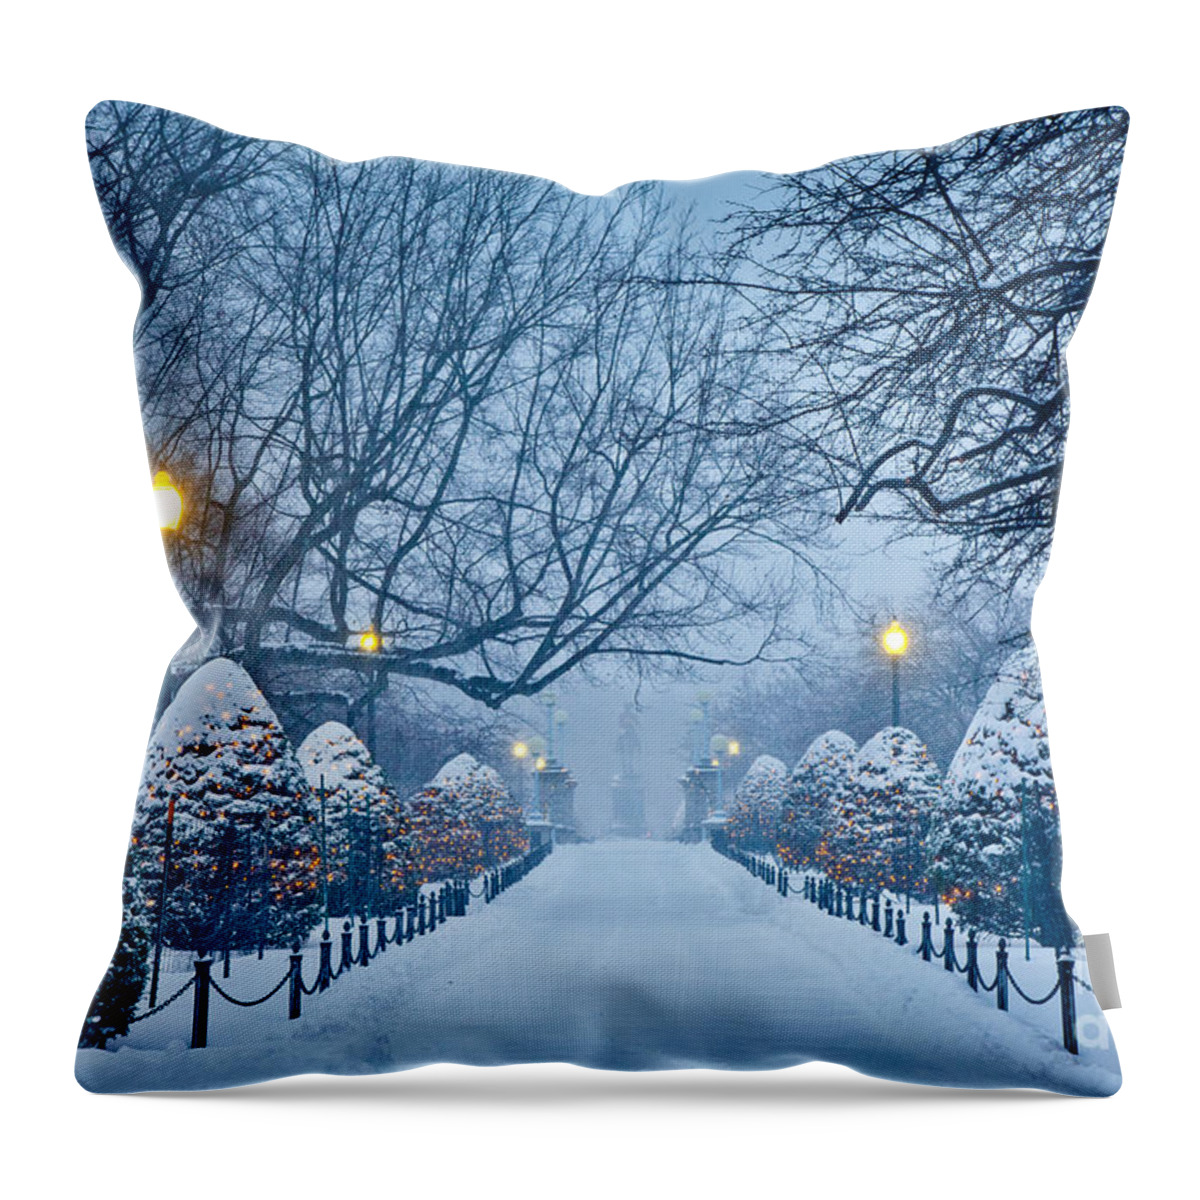 Back Bay Throw Pillow featuring the photograph Public Garden Walk by Susan Cole Kelly